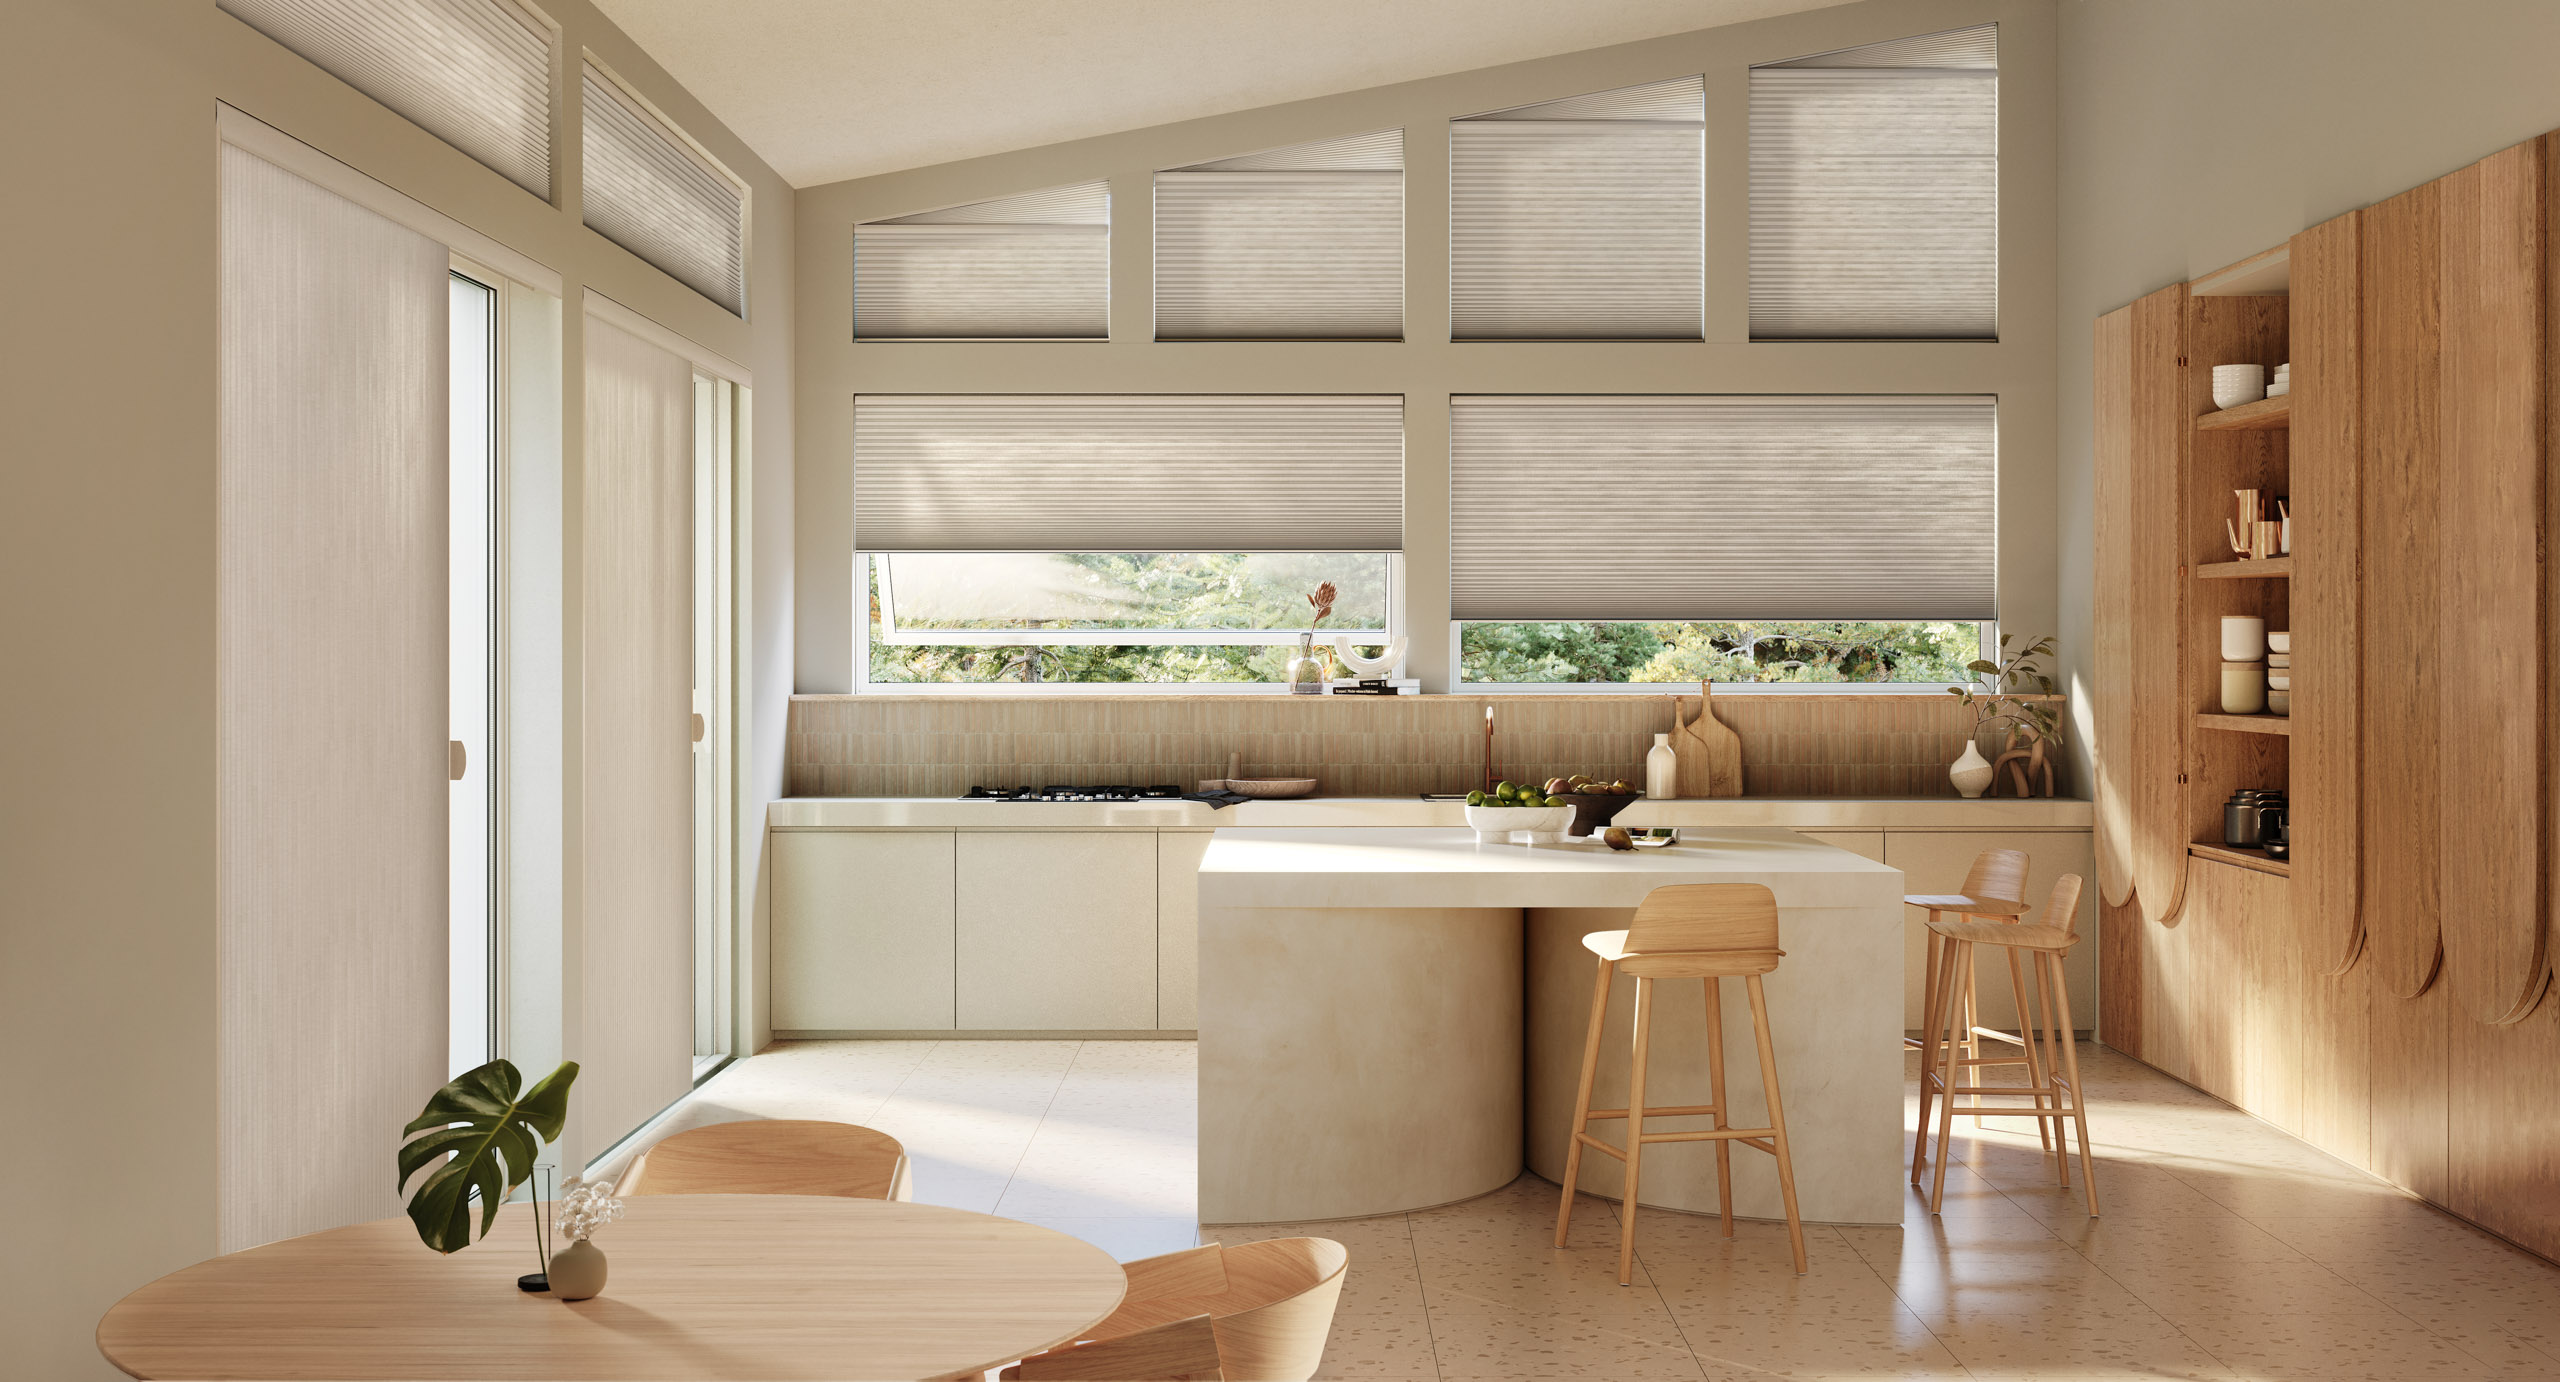 Dining area in kitchen with Hunter Douglas Duette® Cellular Shades.